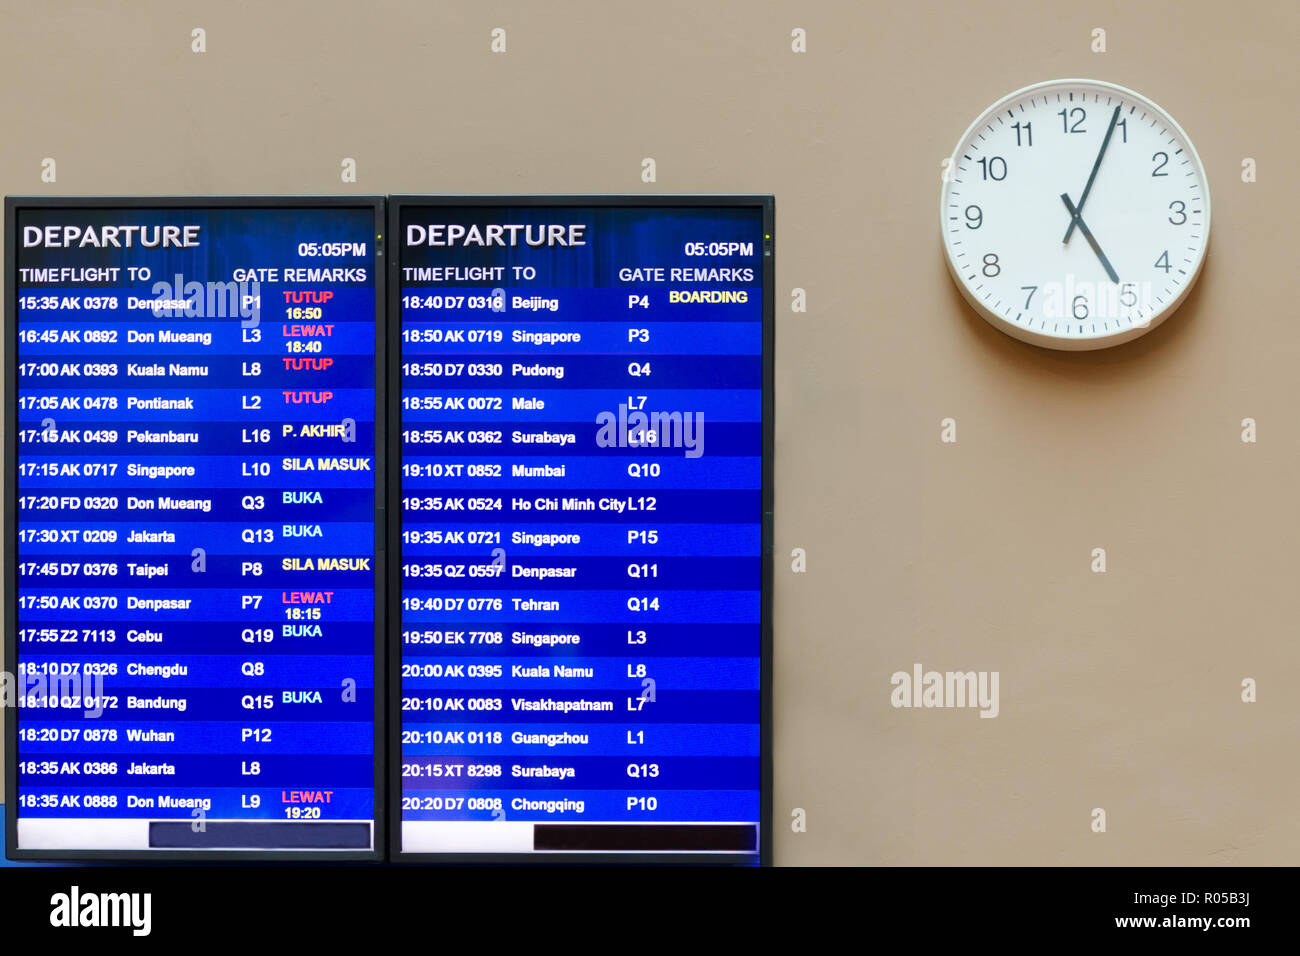 Airport information board, near the clock with hands that shows four minutes past five, flight schedule. Malaysia, Kuala Lumpur, KLIA 2. Stock Photo